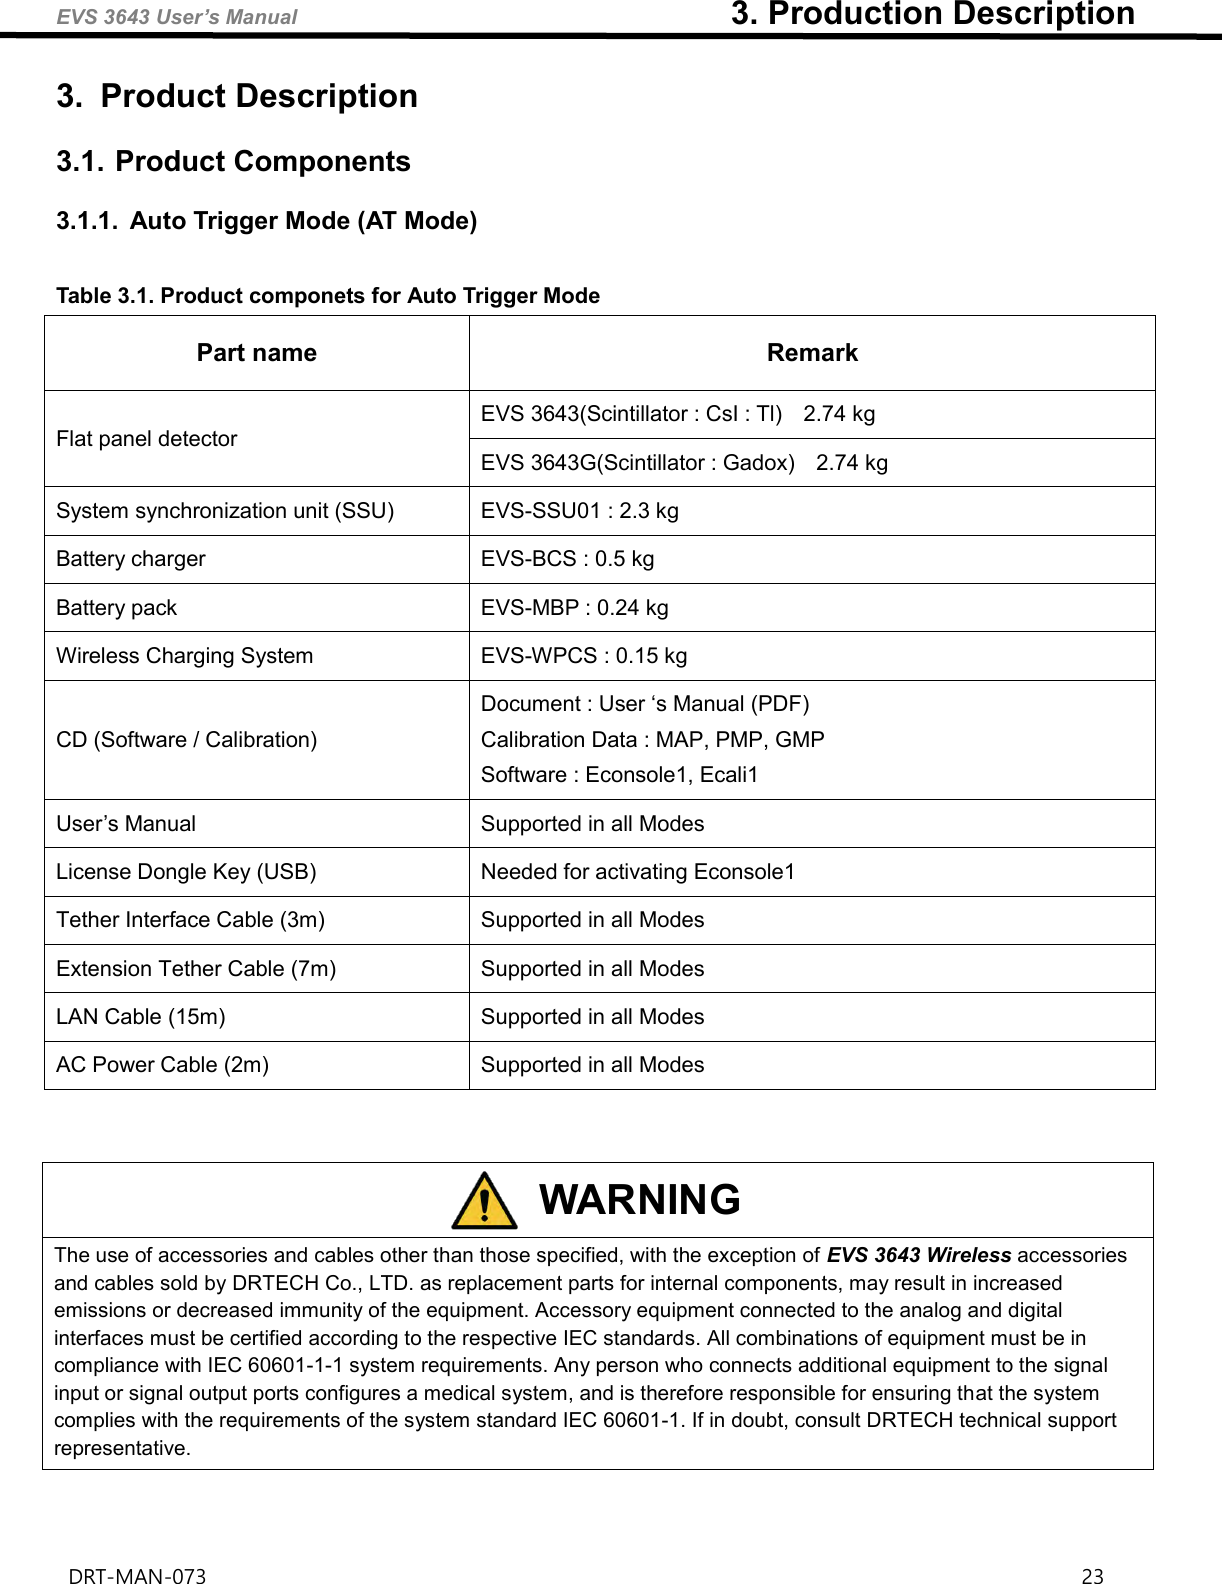 EVS 3643 User’s Manual                                                    3. Production Description DRT-MAN-073                                                                                                                                                                23   3.  Product Description 3.1. Product Components 3.1.1.  Auto Trigger Mode (AT Mode)  Table 3.1. Product componets for Auto Trigger Mode Part name Remark Flat panel detector EVS 3643(Scintillator : CsI : Tl)    2.74 kg EVS 3643G(Scintillator : Gadox)    2.74 kg System synchronization unit (SSU) EVS-SSU01 : 2.3 kg Battery charger   EVS-BCS : 0.5 kg Battery pack EVS-MBP : 0.24 kg Wireless Charging System EVS-WPCS : 0.15 kg CD (Software / Calibration) Document : User ‘s Manual (PDF)   Calibration Data : MAP, PMP, GMP Software : Econsole1, Ecali1 User’s Manual   Supported in all Modes License Dongle Key (USB) Needed for activating Econsole1 Tether Interface Cable (3m)   Supported in all Modes Extension Tether Cable (7m) Supported in all Modes LAN Cable (15m) Supported in all Modes AC Power Cable (2m) Supported in all Modes    WARNING The use of accessories and cables other than those specified, with the exception of EVS 3643 Wireless accessories and cables sold by DRTECH Co., LTD. as replacement parts for internal components, may result in increased emissions or decreased immunity of the equipment. Accessory equipment connected to the analog and digital interfaces must be certified according to the respective IEC standards. All combinations of equipment must be in compliance with IEC 60601-1-1 system requirements. Any person who connects additional equipment to the signal input or signal output ports configures a medical system, and is therefore responsible for ensuring that the system complies with the requirements of the system standard IEC 60601-1. If in doubt, consult DRTECH technical support representative.    